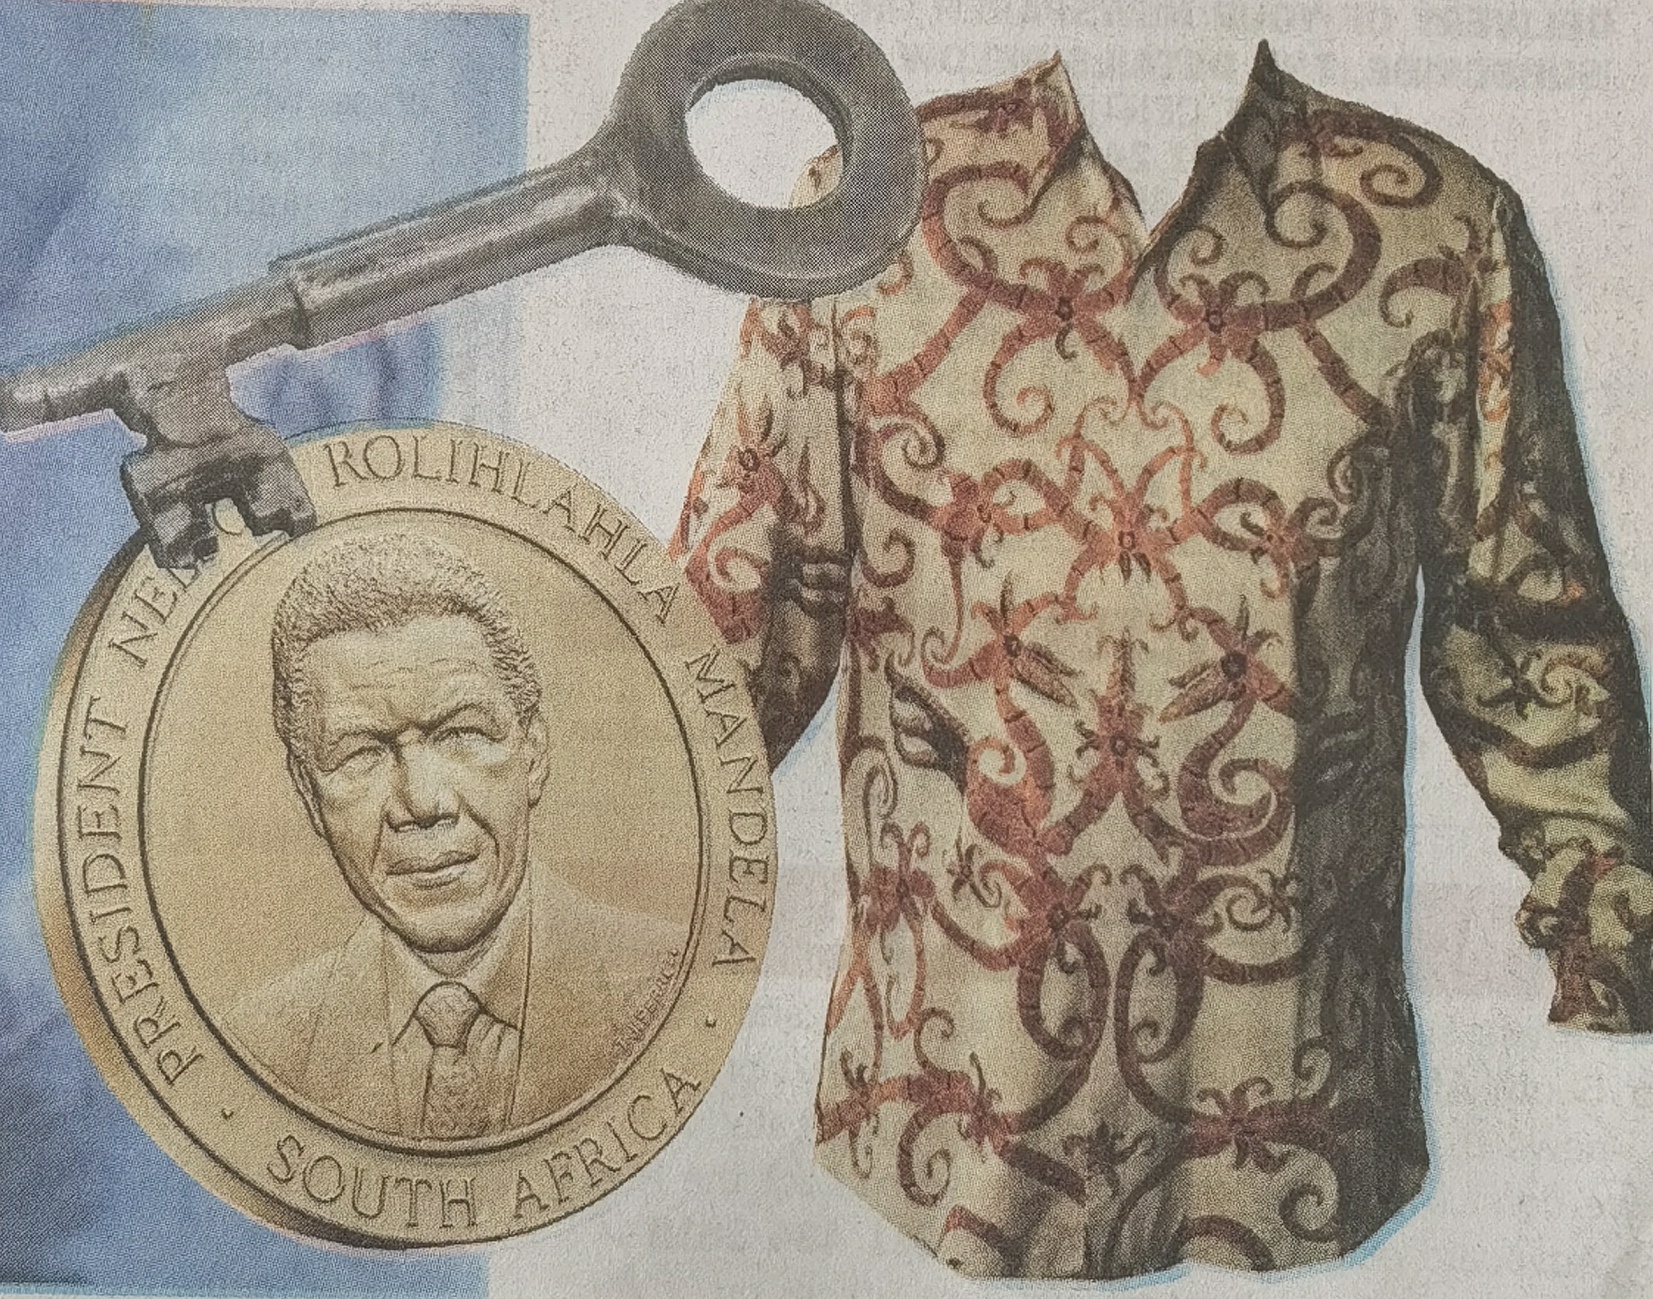 The key to Mandela 'Robben Island Key is being sold for R17 million